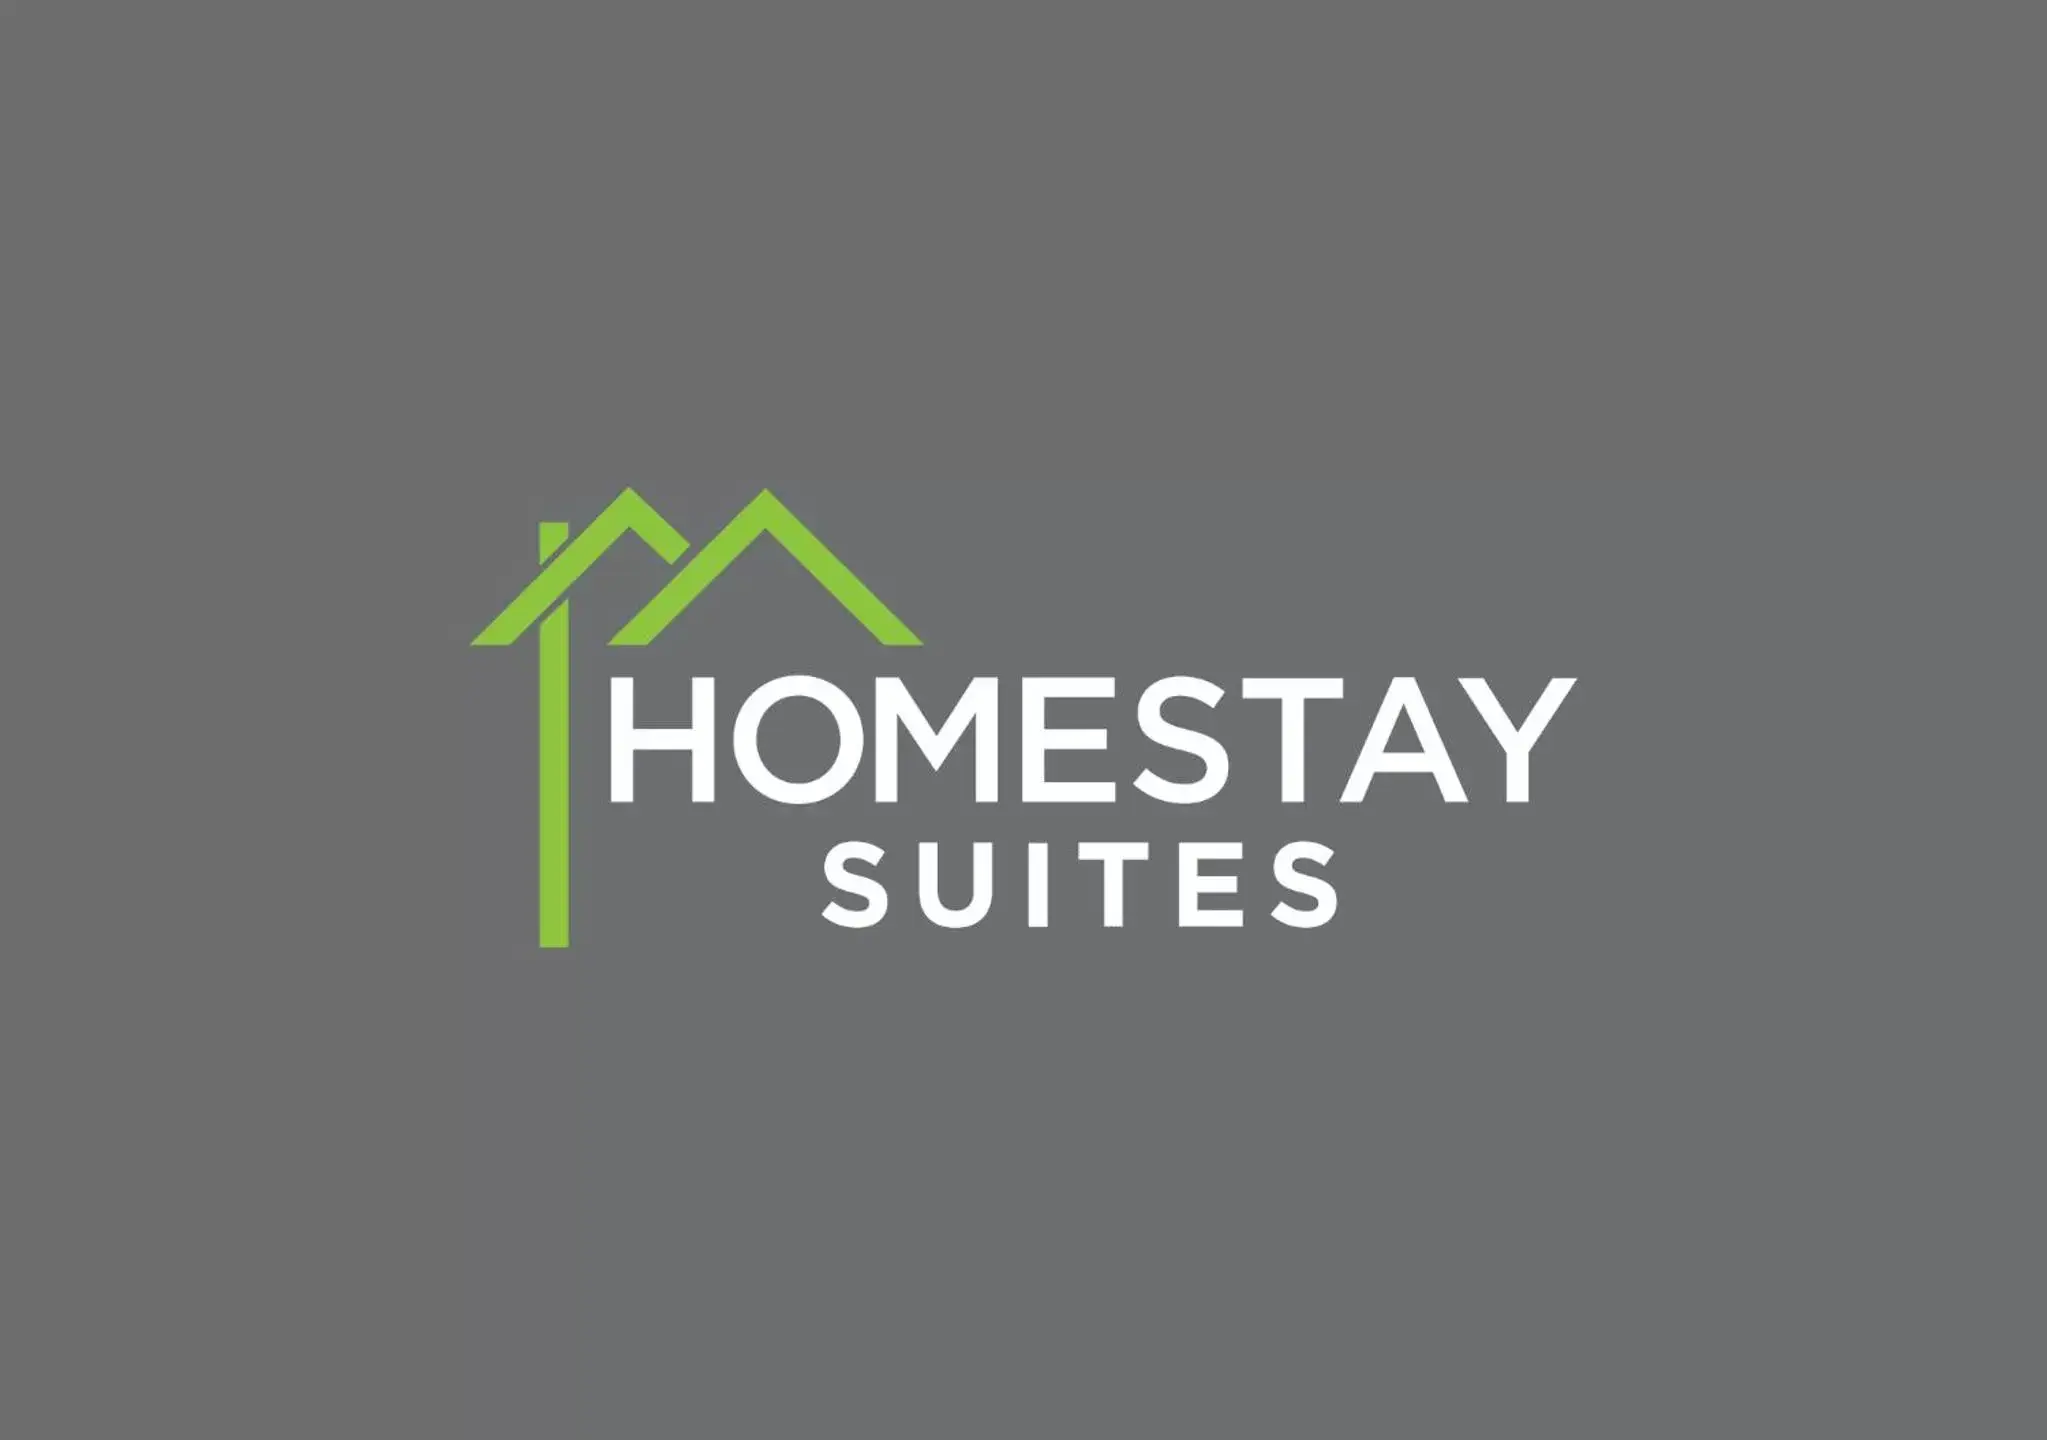 Logo/Certificate/Sign in HomeStay Suites